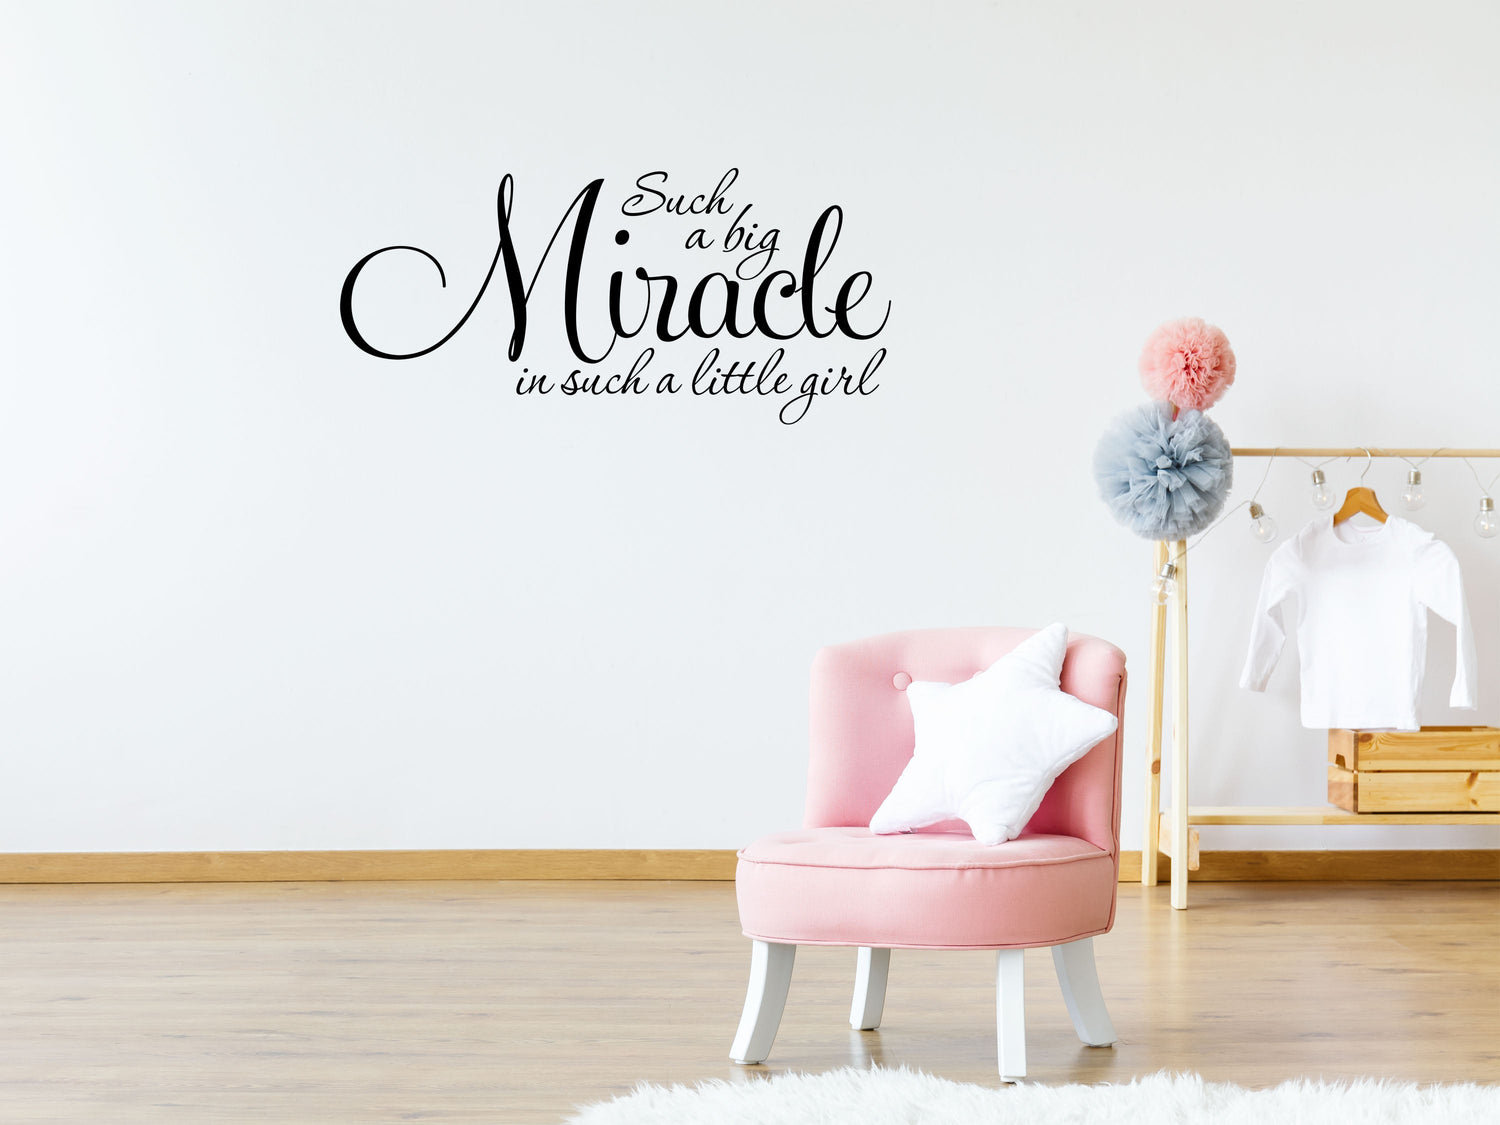 Nursery Wall Decals: Adorable and Affordable Wall Art for Baby's Room